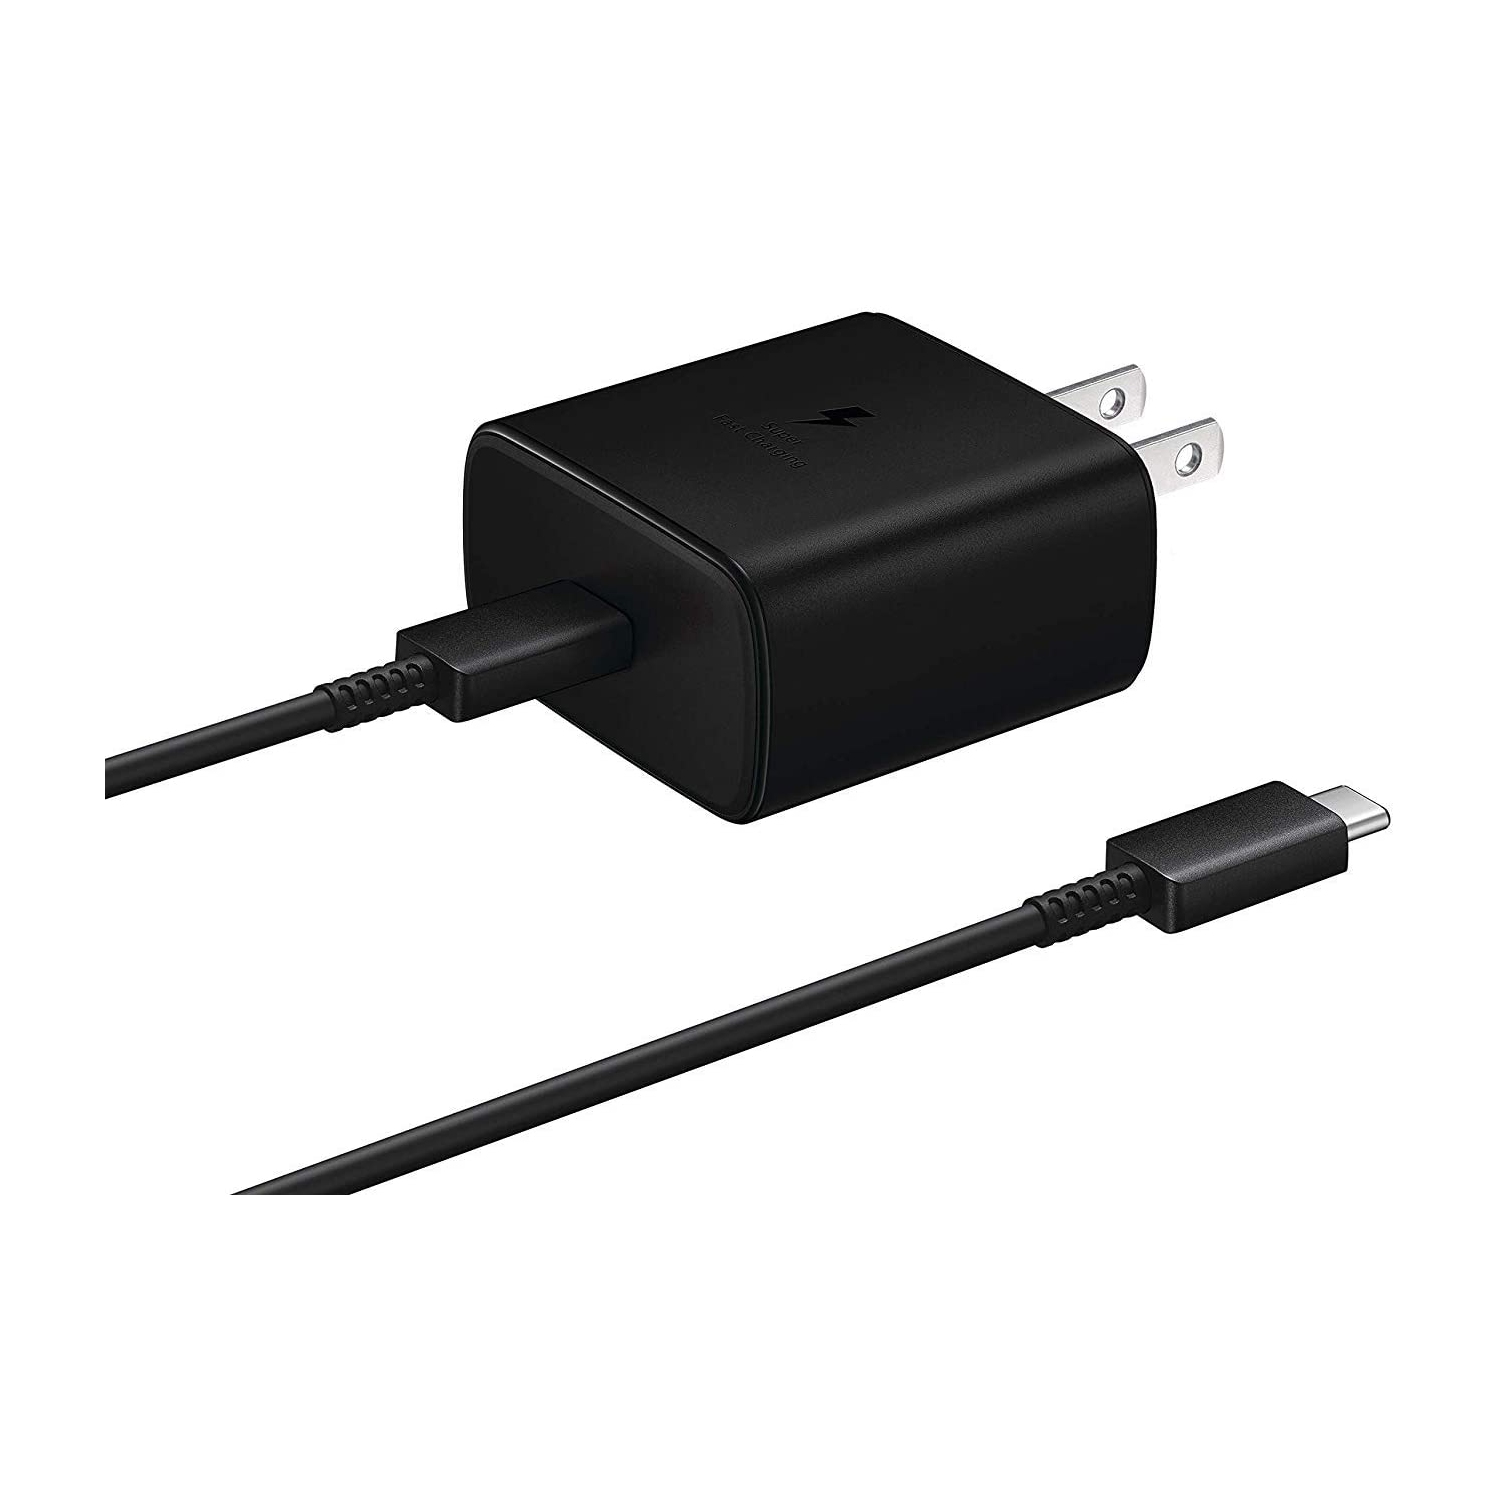 45W USB-C PD PPS Super Fast Charging Wall Charger Adapter + 1m Type C Cable for Samsung Galaxy S10 S20 Note 10 20 Ultra, Black